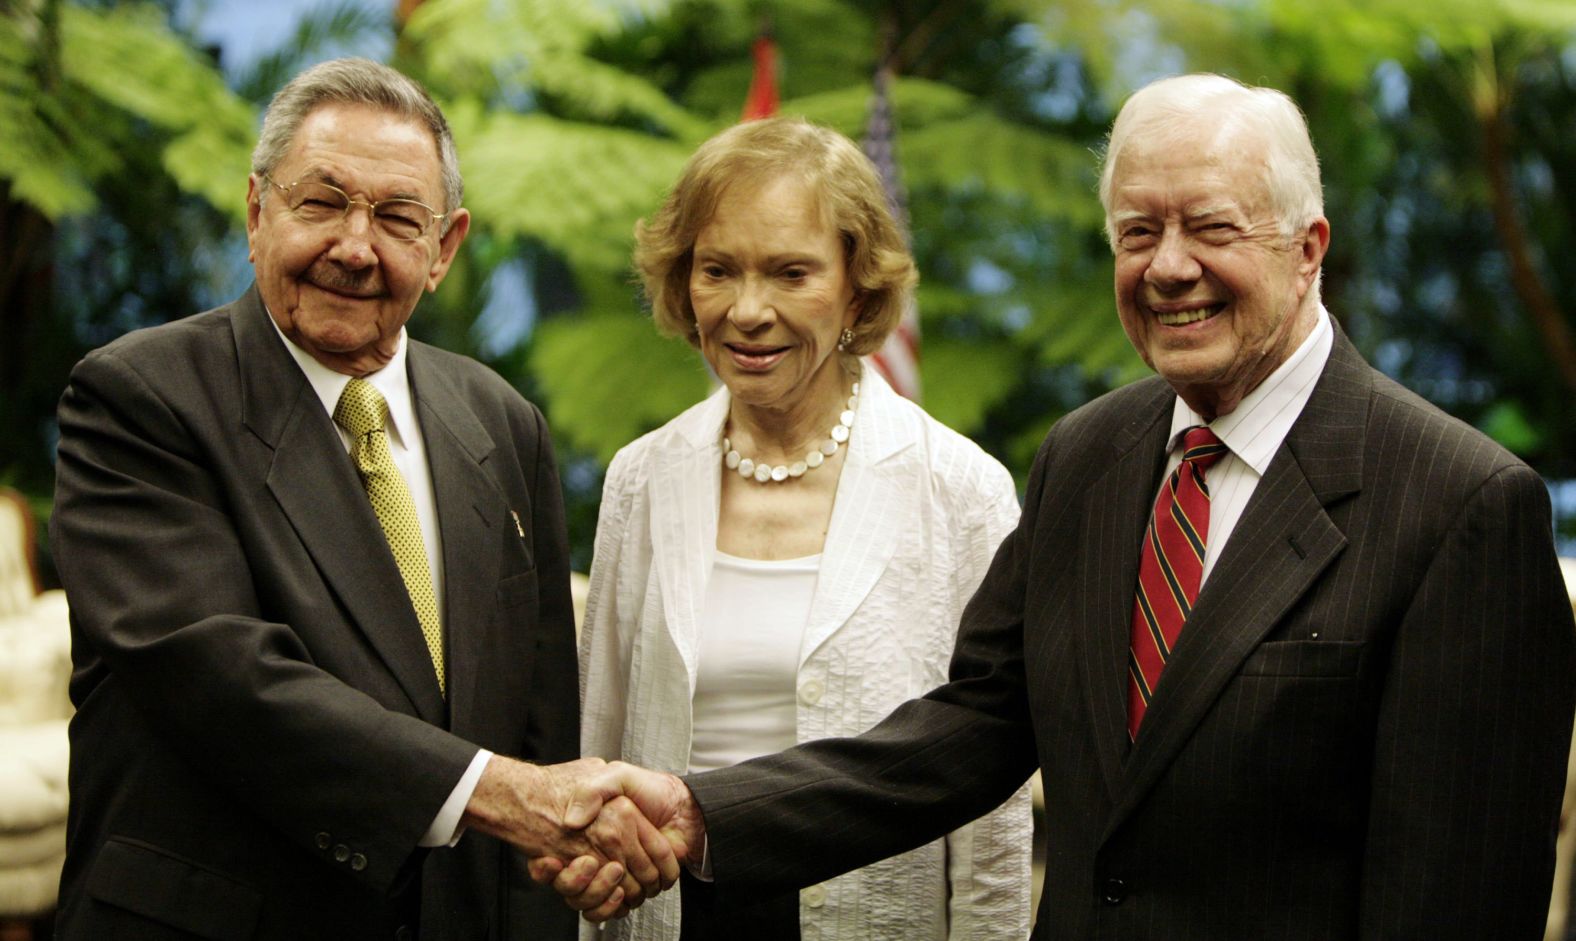 Cuban President Raul Castro greets Carter and his wife at the Revolution Palace in Havana in March 2011.